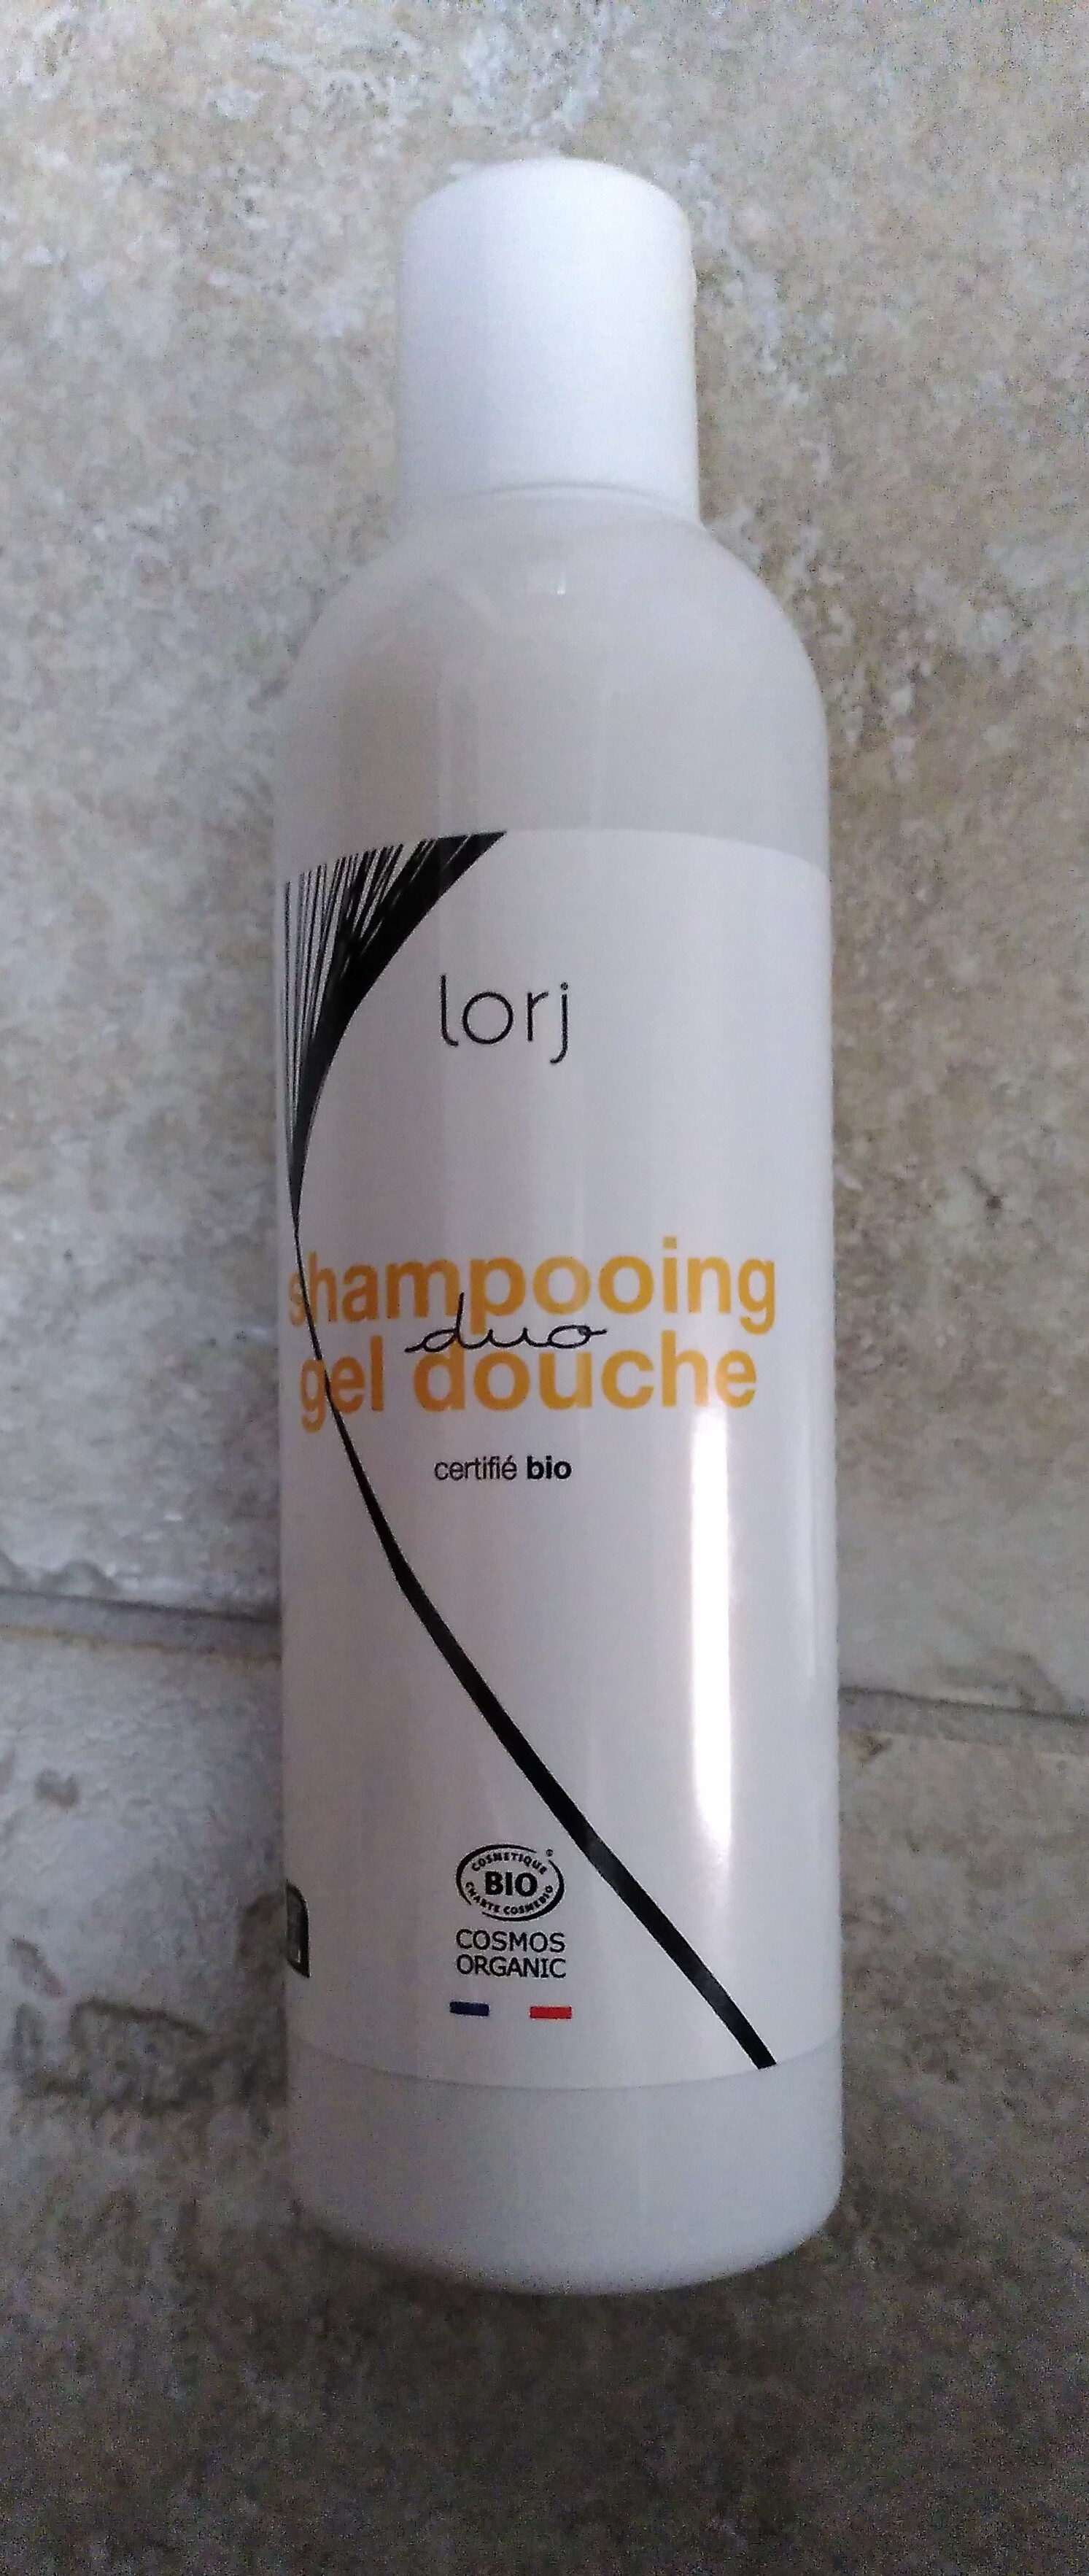 Duo shampoing gel douche - Product - fr